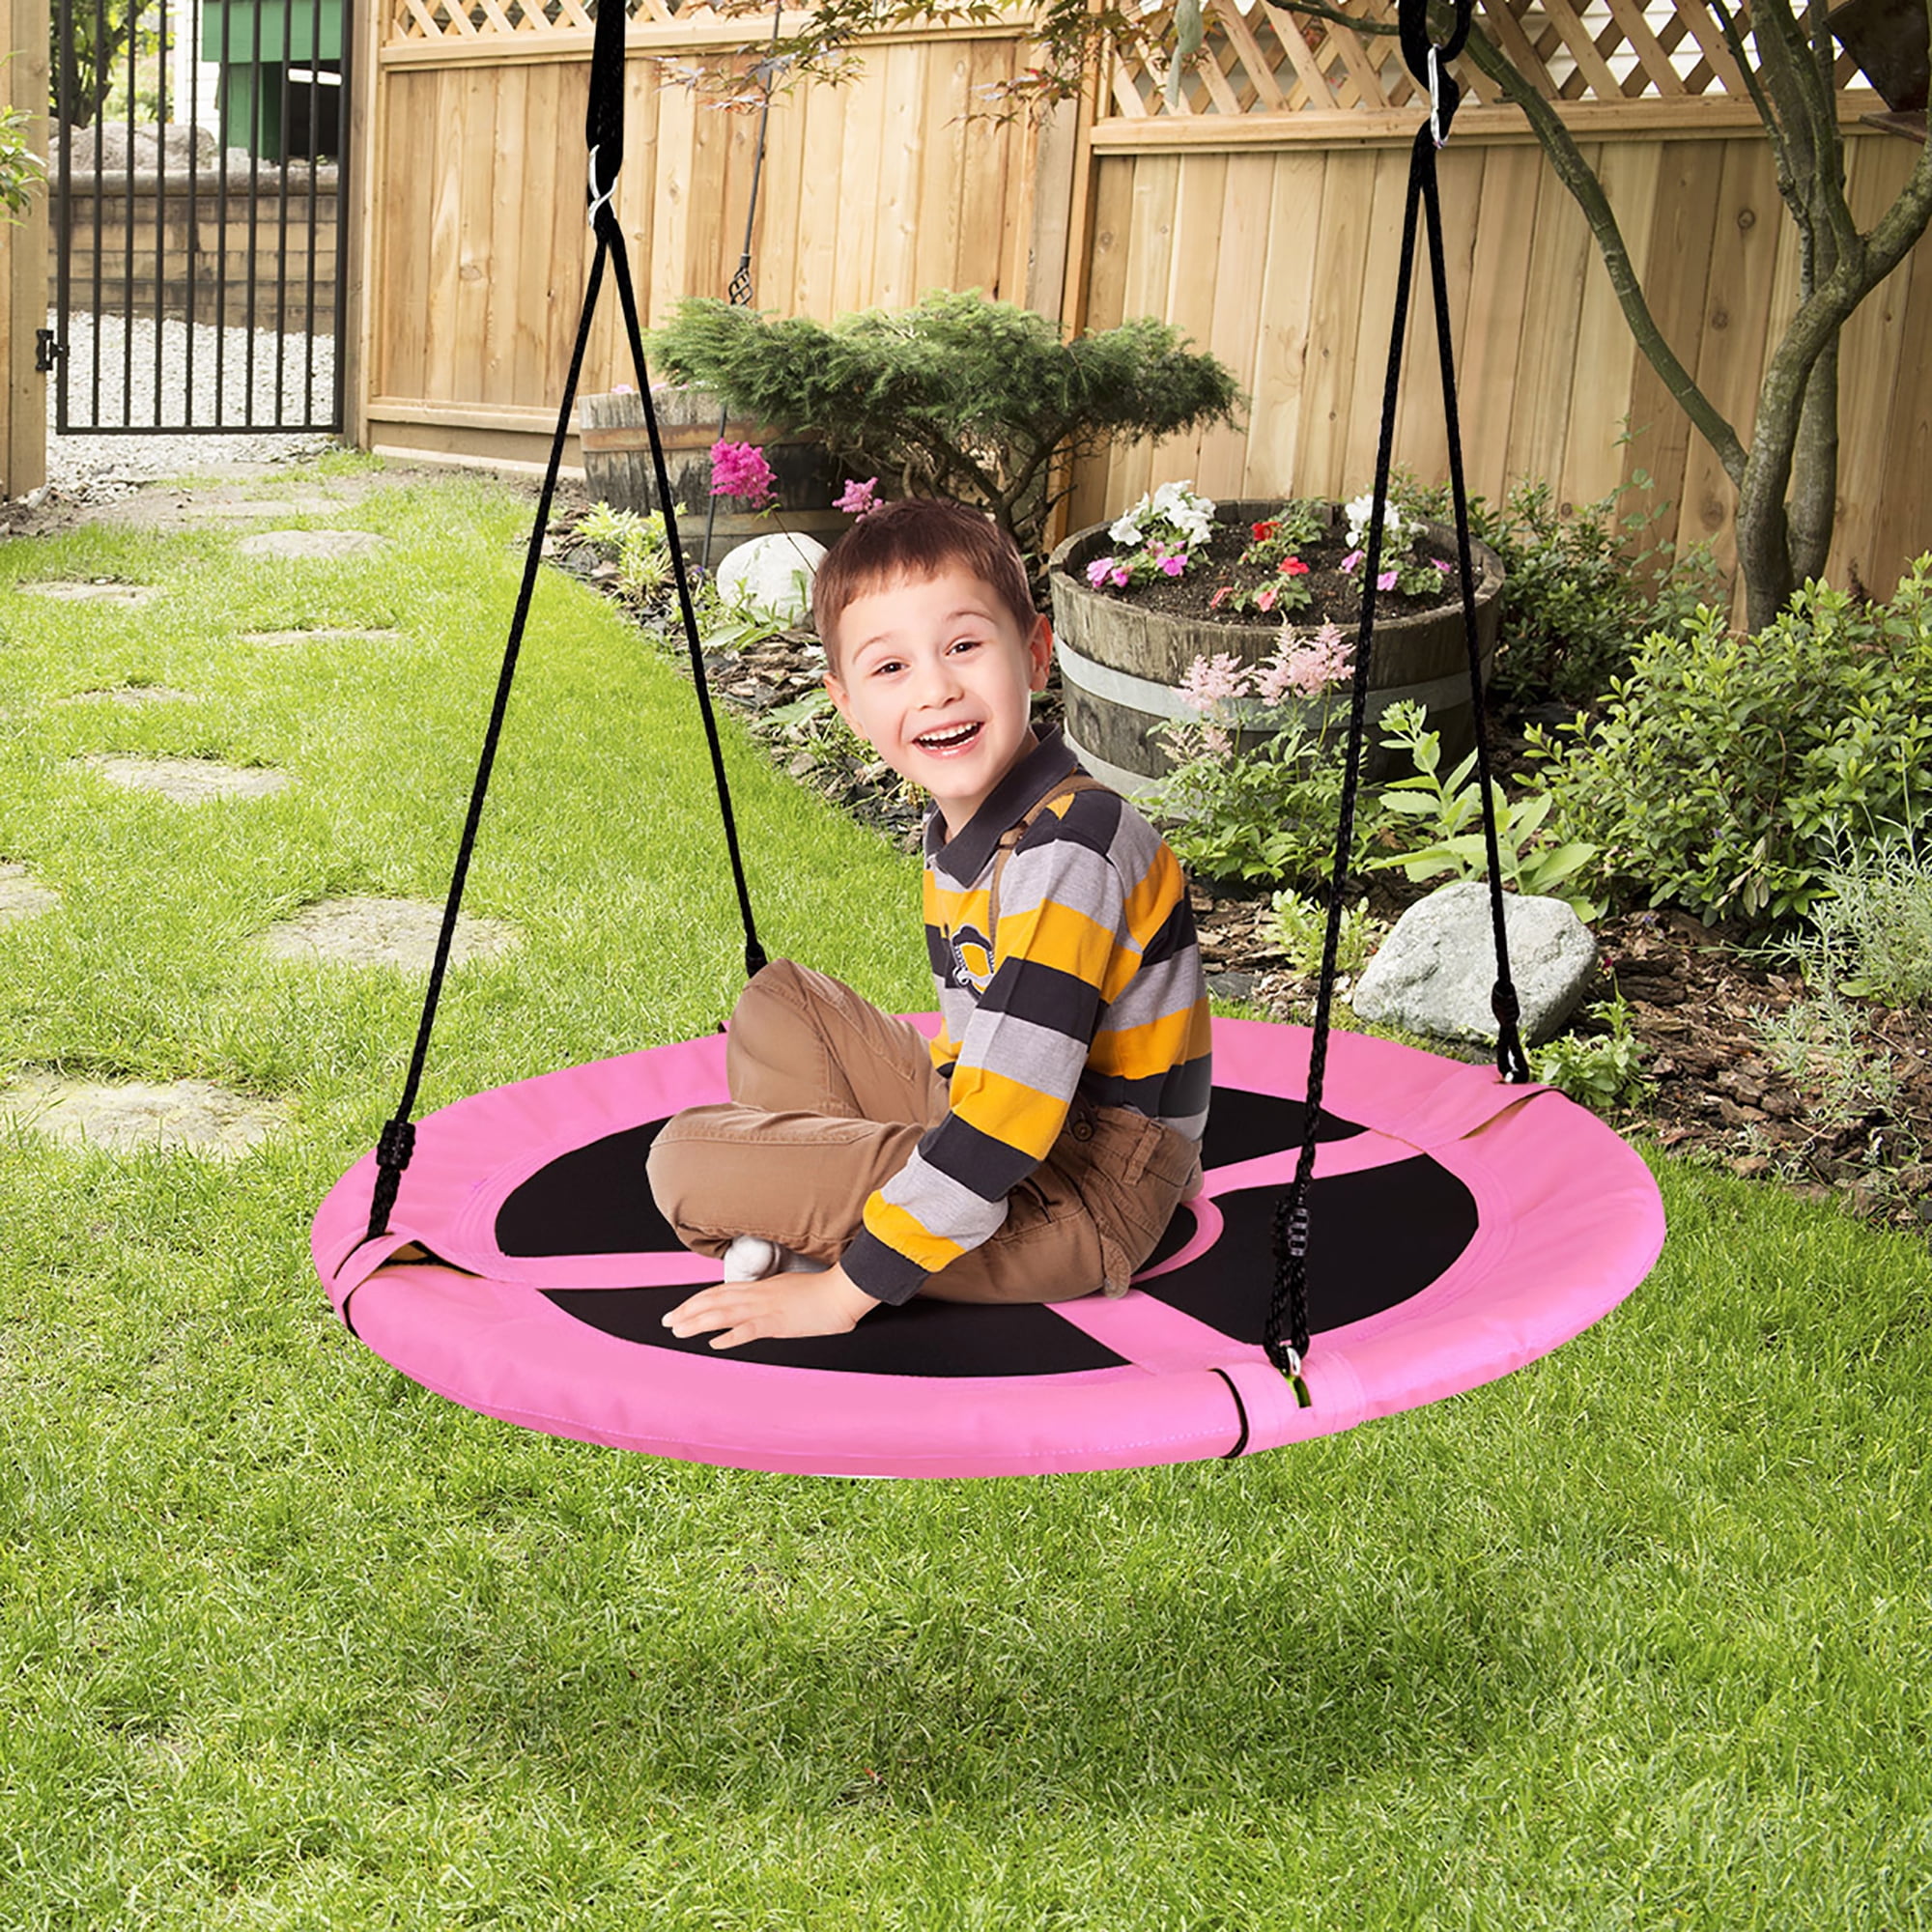 Attaches to Trees or Existing Swing Sets Dreambeauty Flying Saucer Tree Swing 40 Round Swing Set Multicolor Adults,Easy Install Children Steel Frame Giant Large Round Tree Swings for Kids 